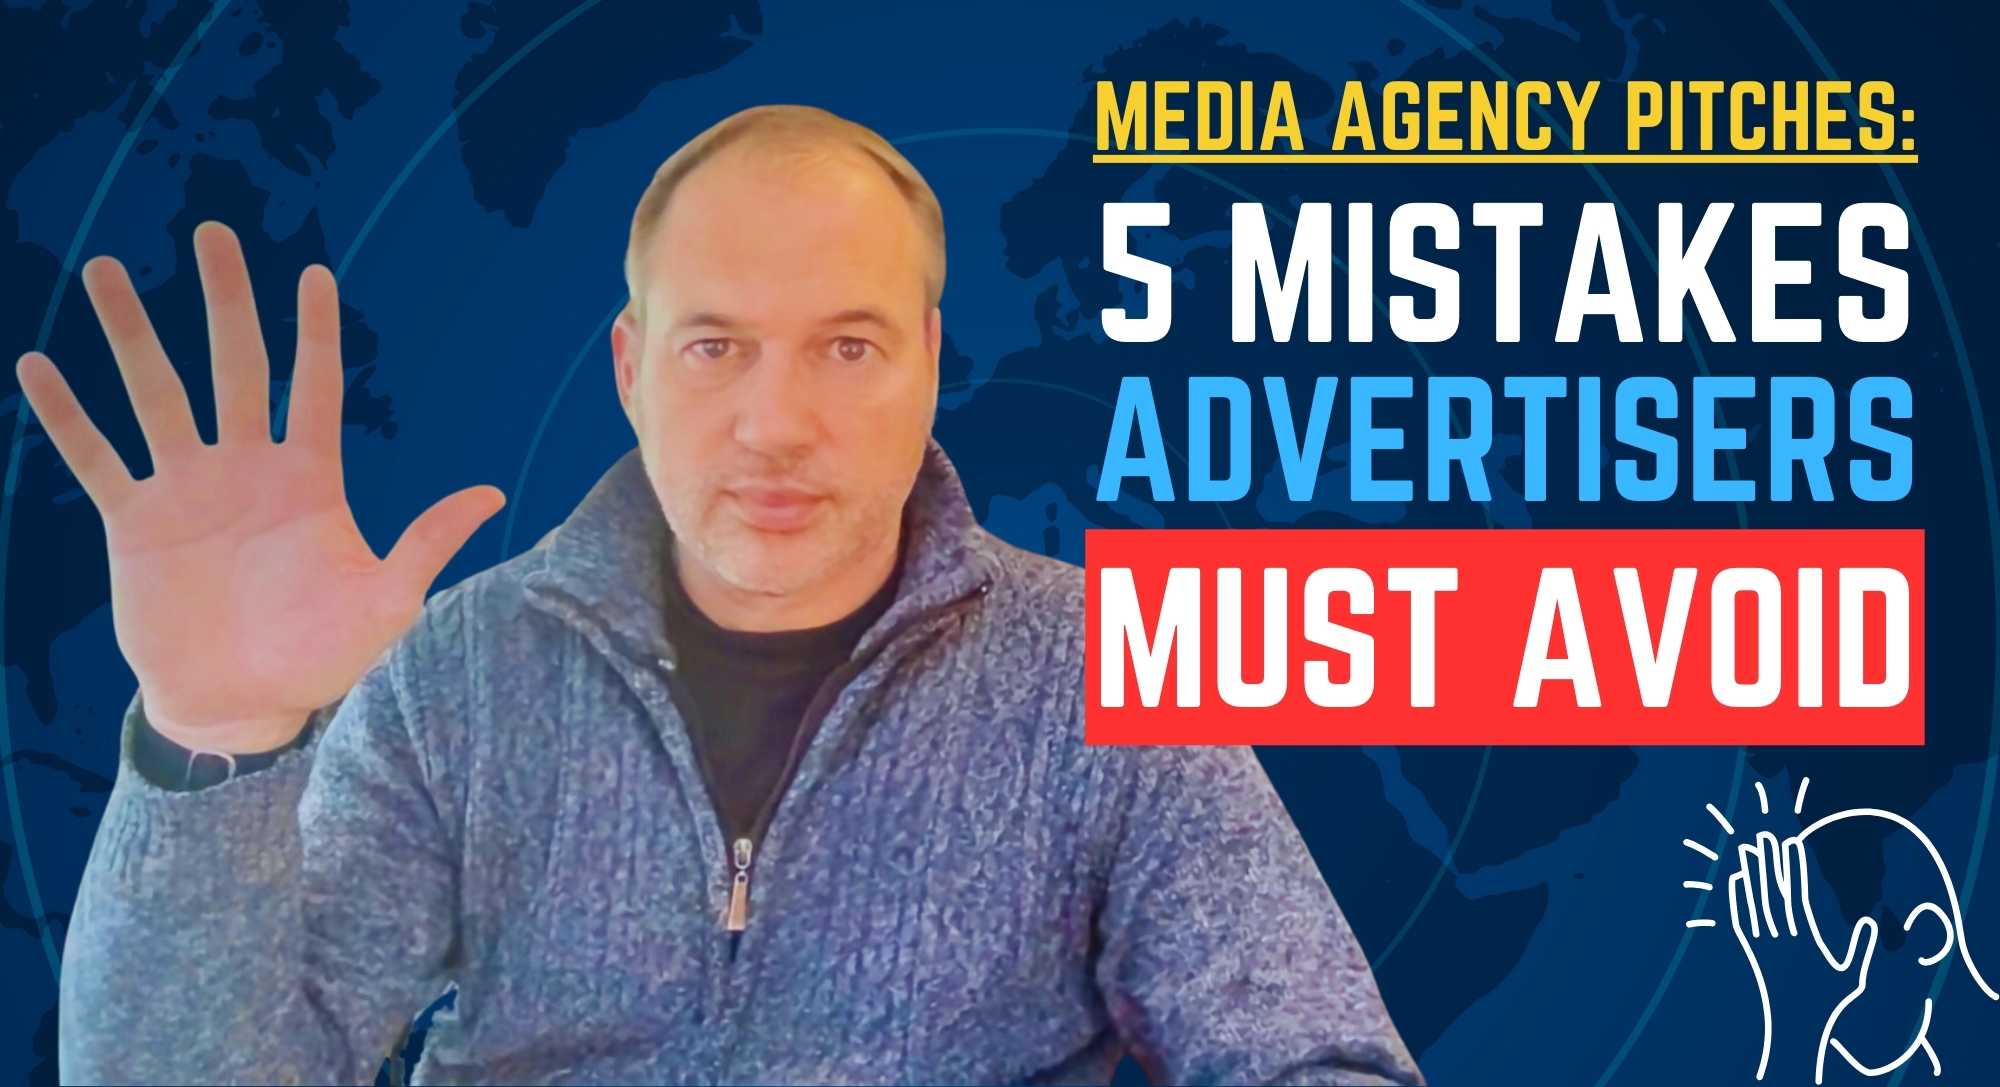 Media Agency Pitches: 5 Mistakes Advertisers MUST Avoid